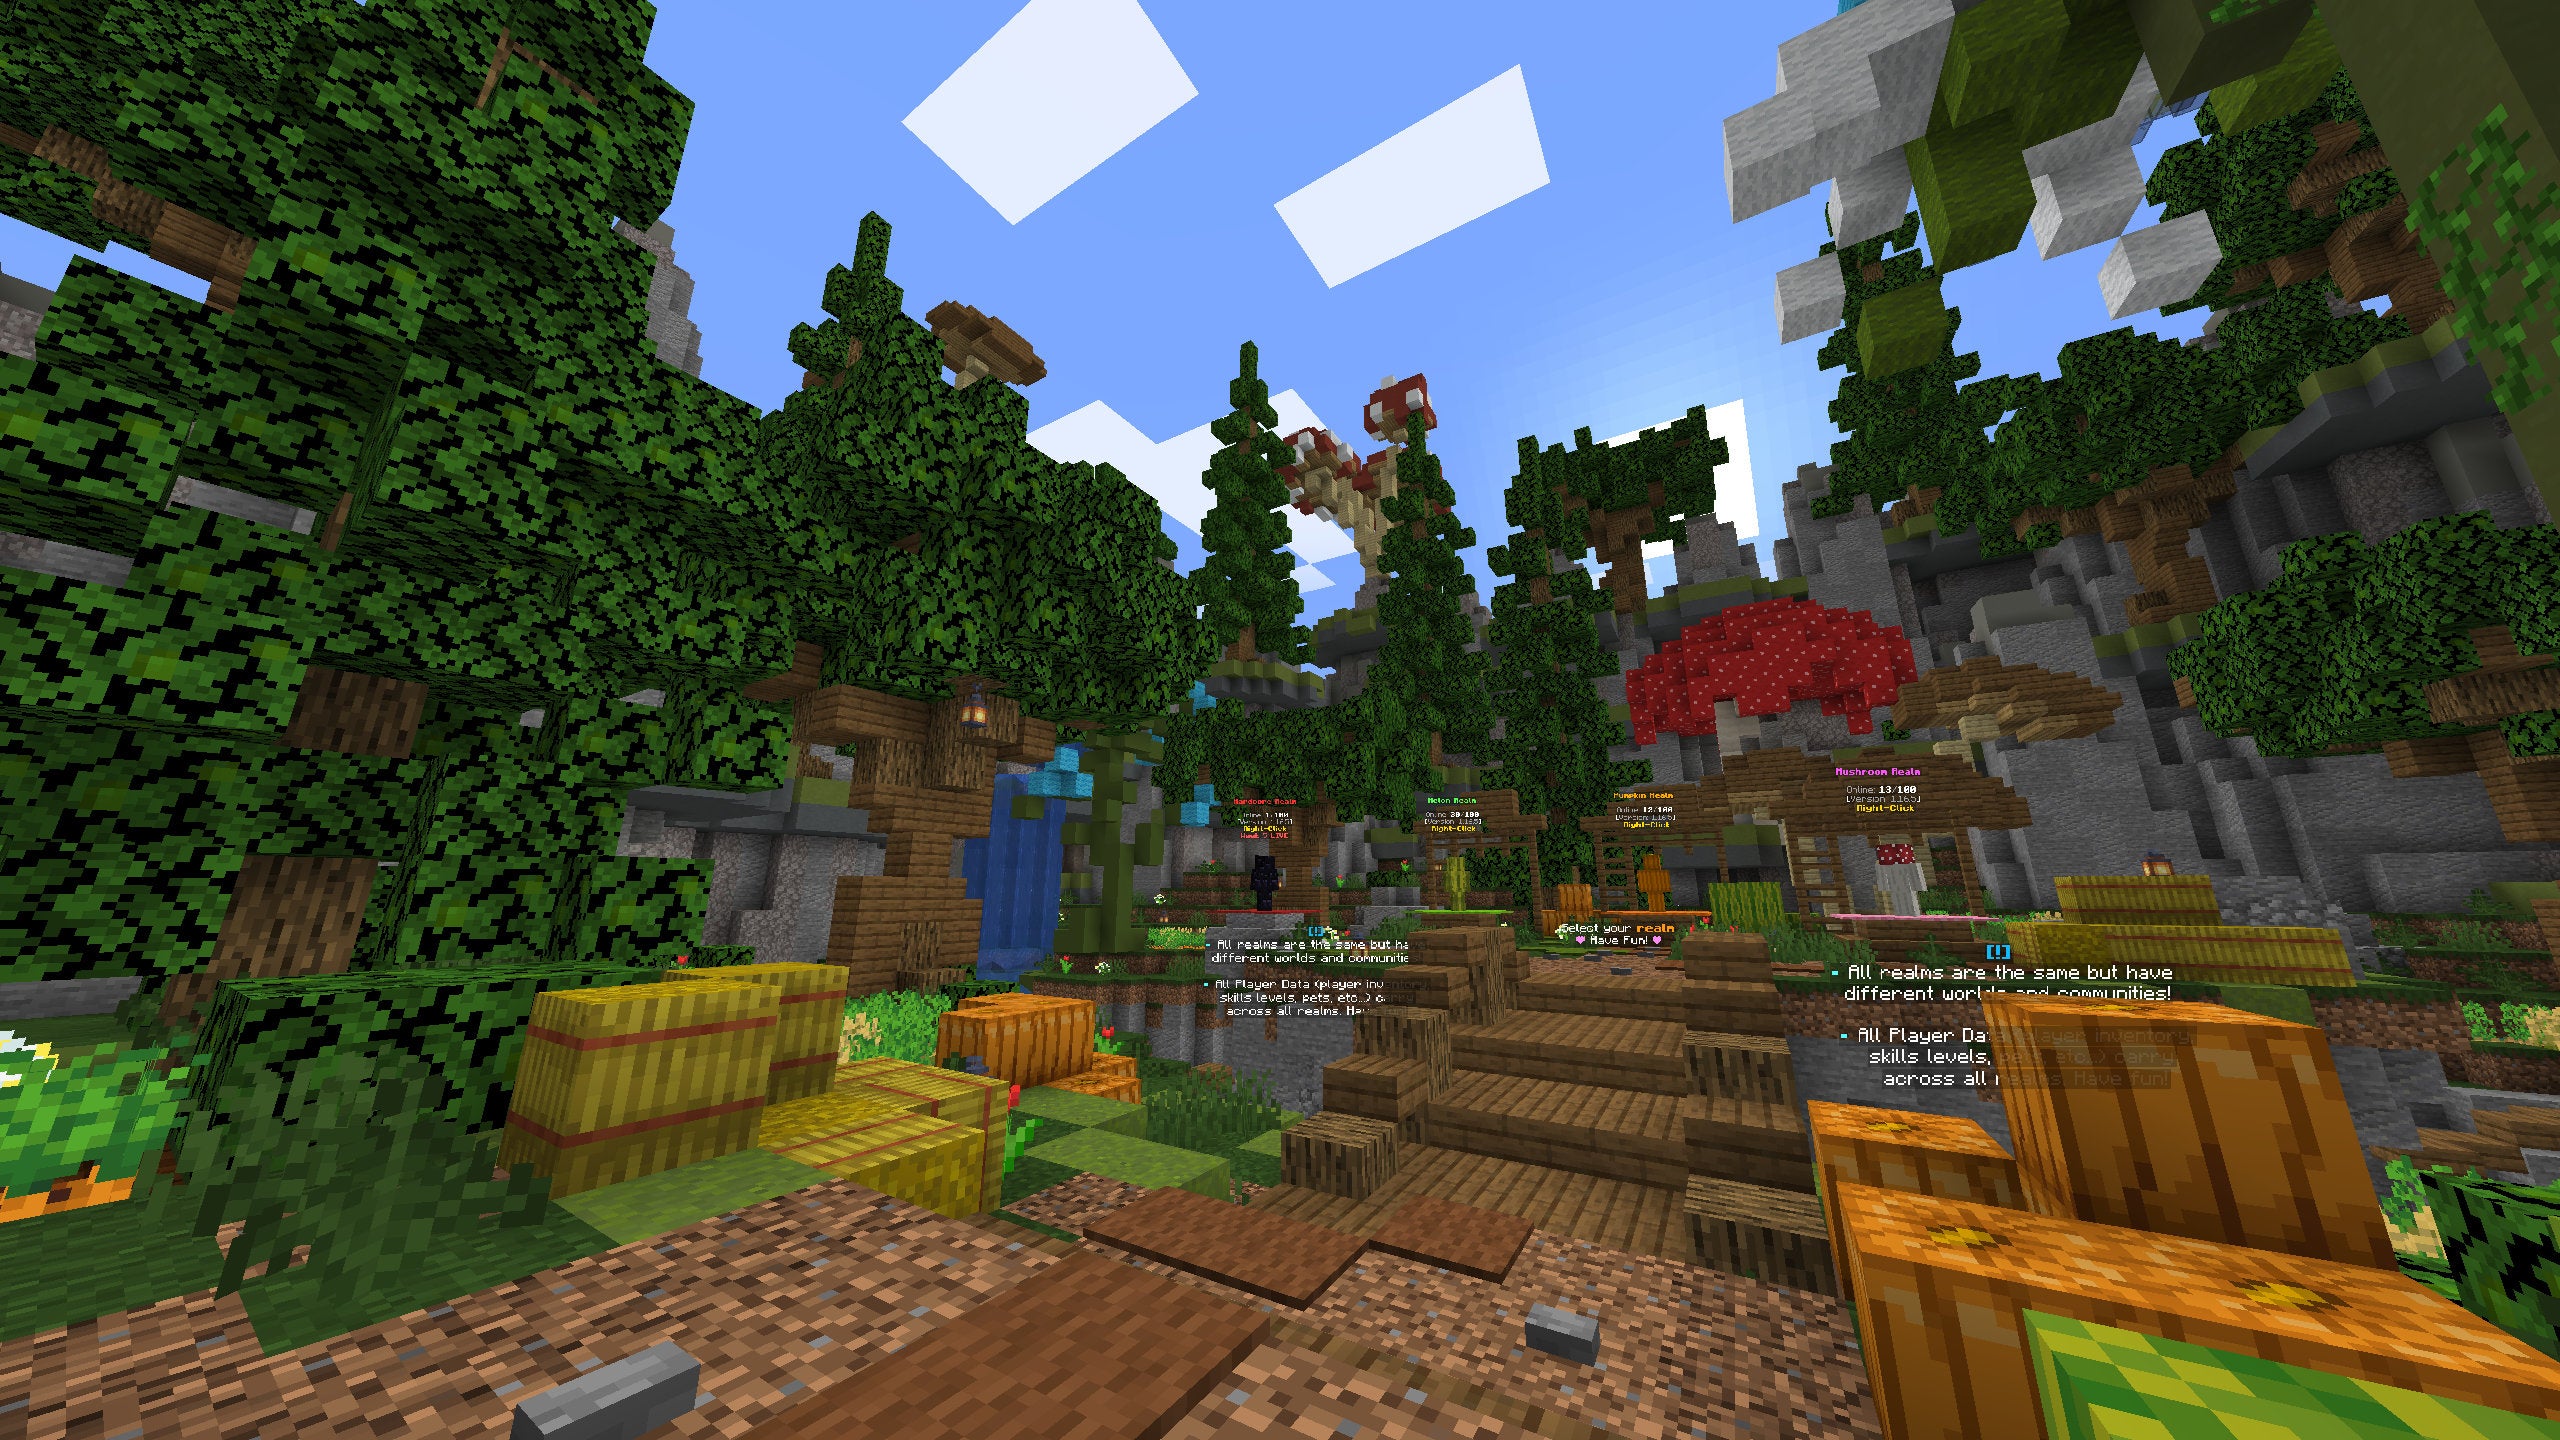 A Minecraft screenshot of the lobby of the Seed server.